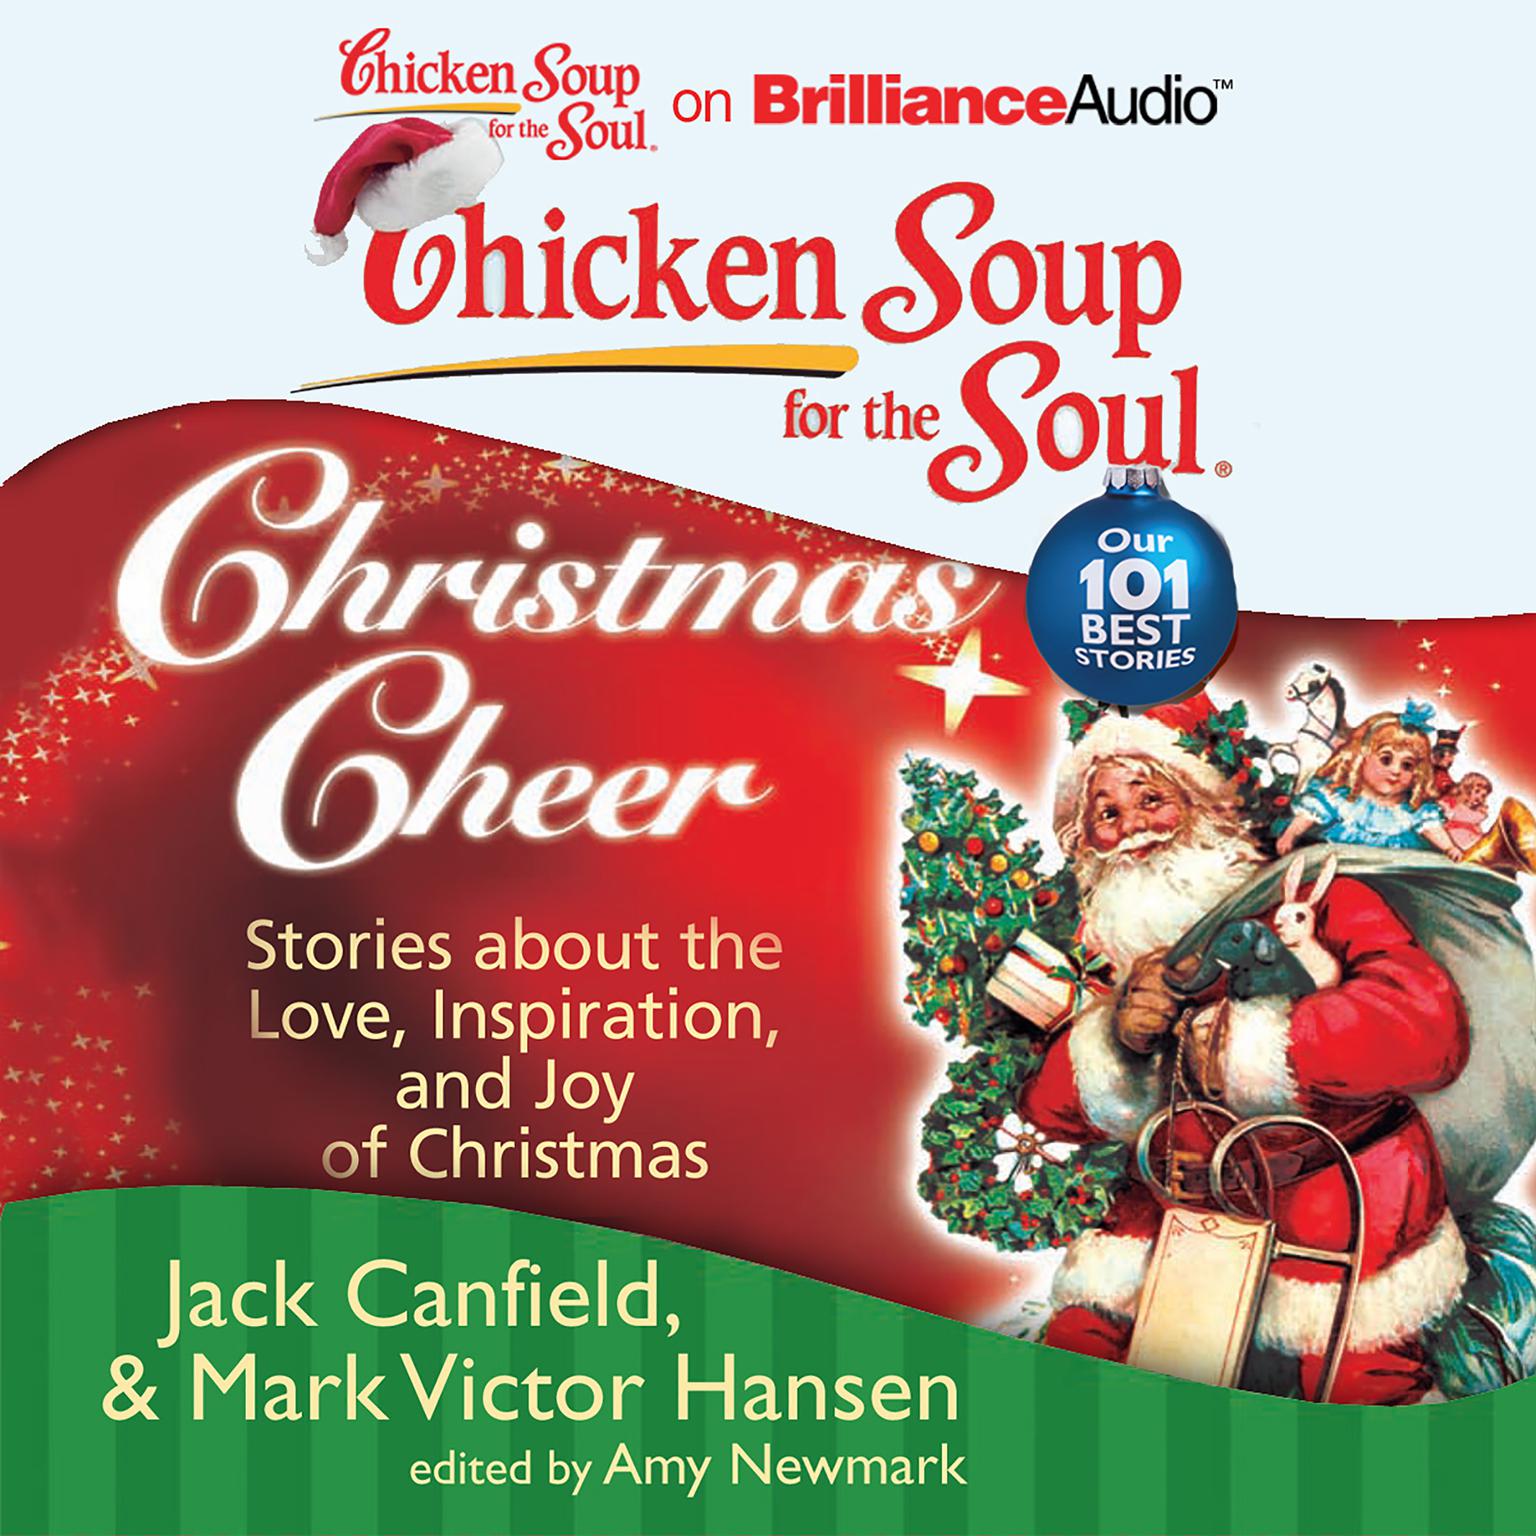 Chicken Soup for the Soul: Christmas Cheer: 101 Stories about the Love, Inspiration, and Joy of Christmas Audiobook, by Jack Canfield